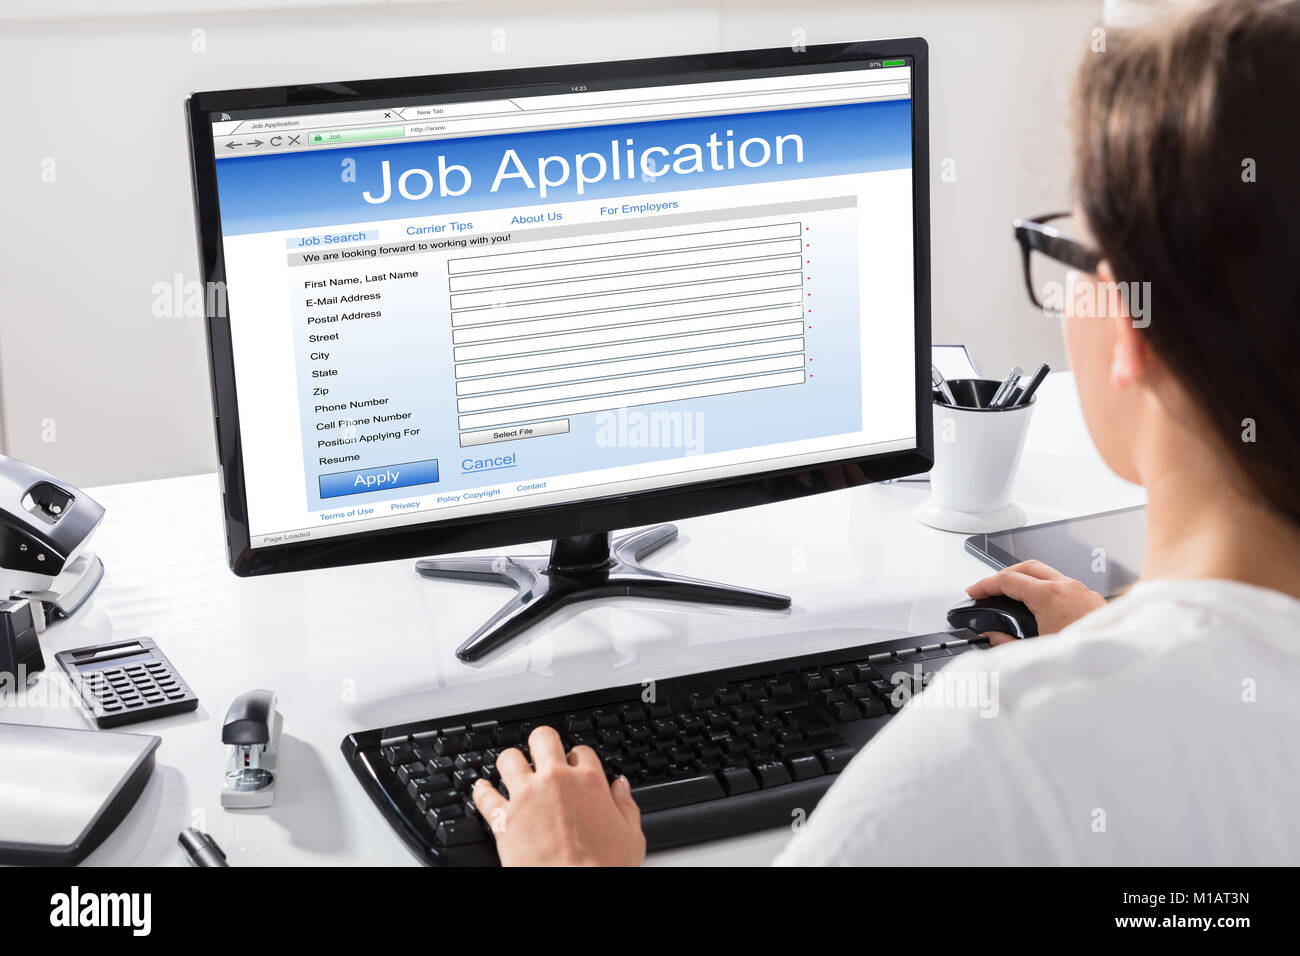 Rear View Of A Woman Filling Job Application On Desk Stock Photo